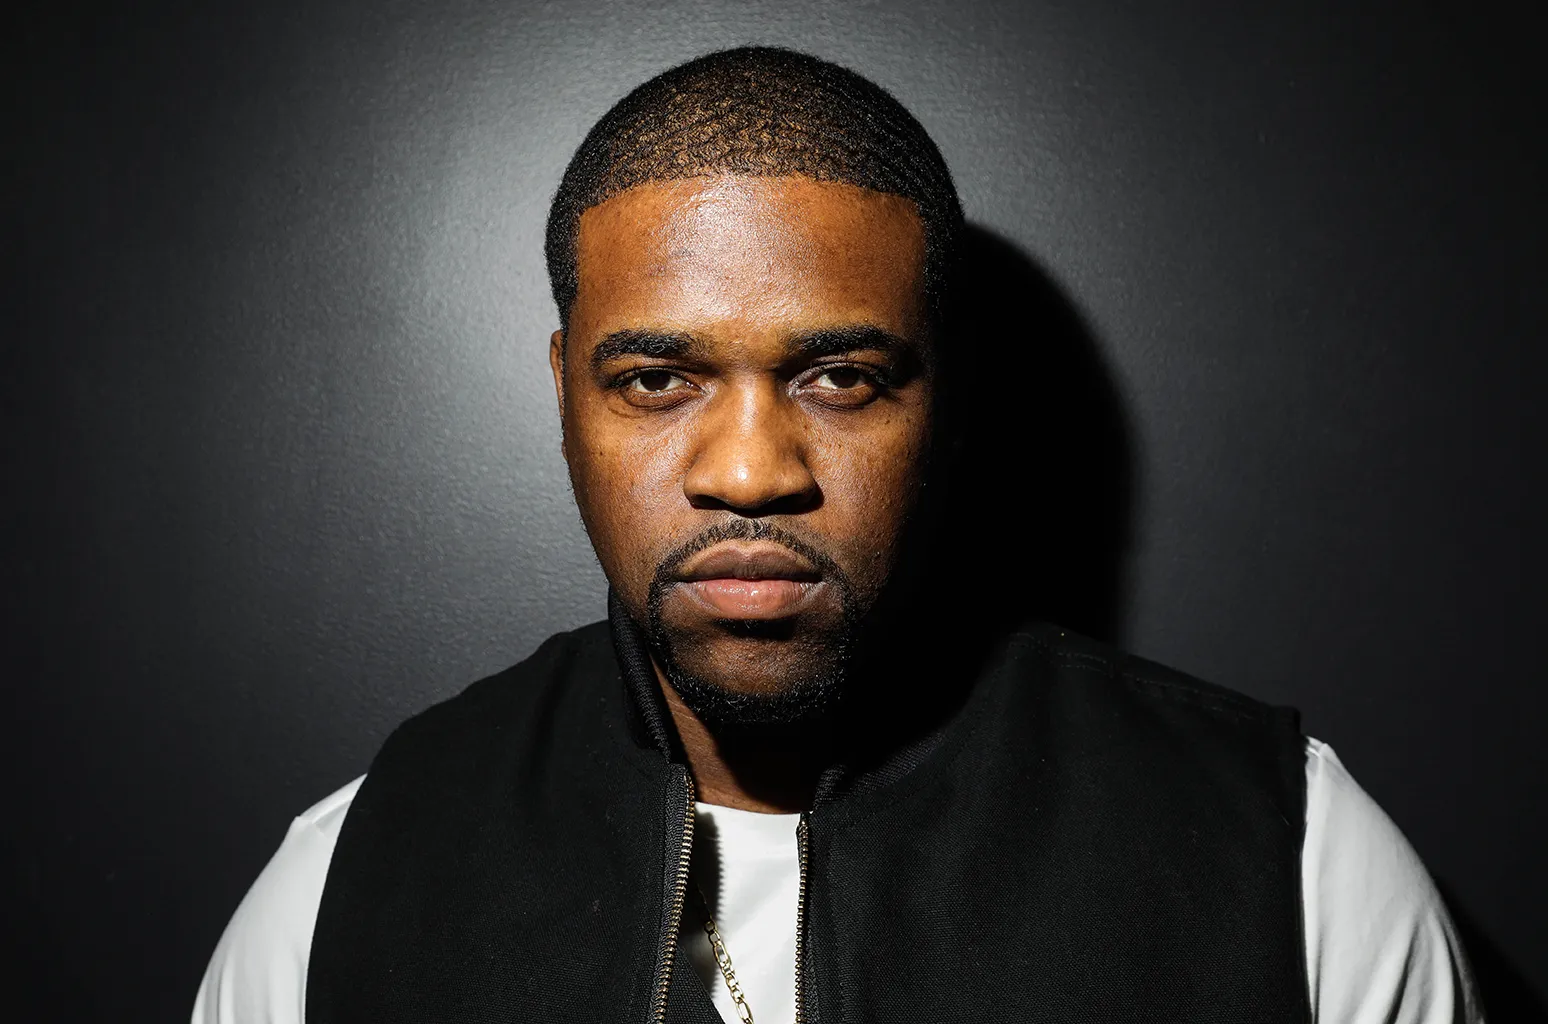 Asap Ferg'S Changes Name While Releasing New Single As Fans Speculate His Ties To Asap Mob 1